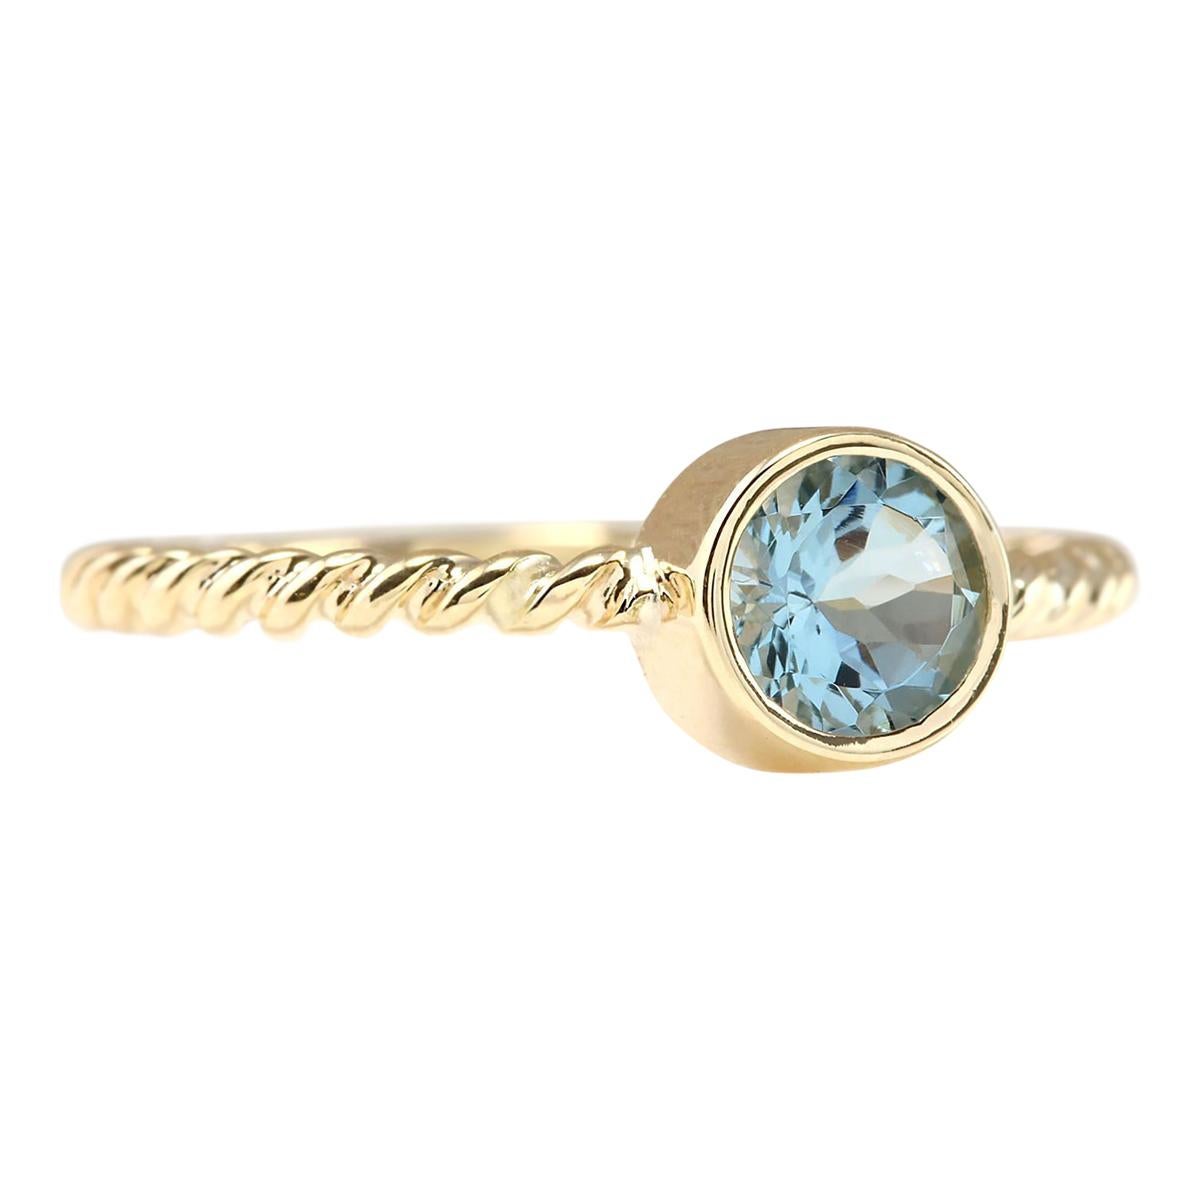 Stamped: 14K Yellow Gold
Total Ring Weight: 2.2 Grams
Total Natural Aquamarine Weight is 1.00 Carat
Color: Blue
Face Measures: 6.00x6.00 mm
Sku: [703219W]